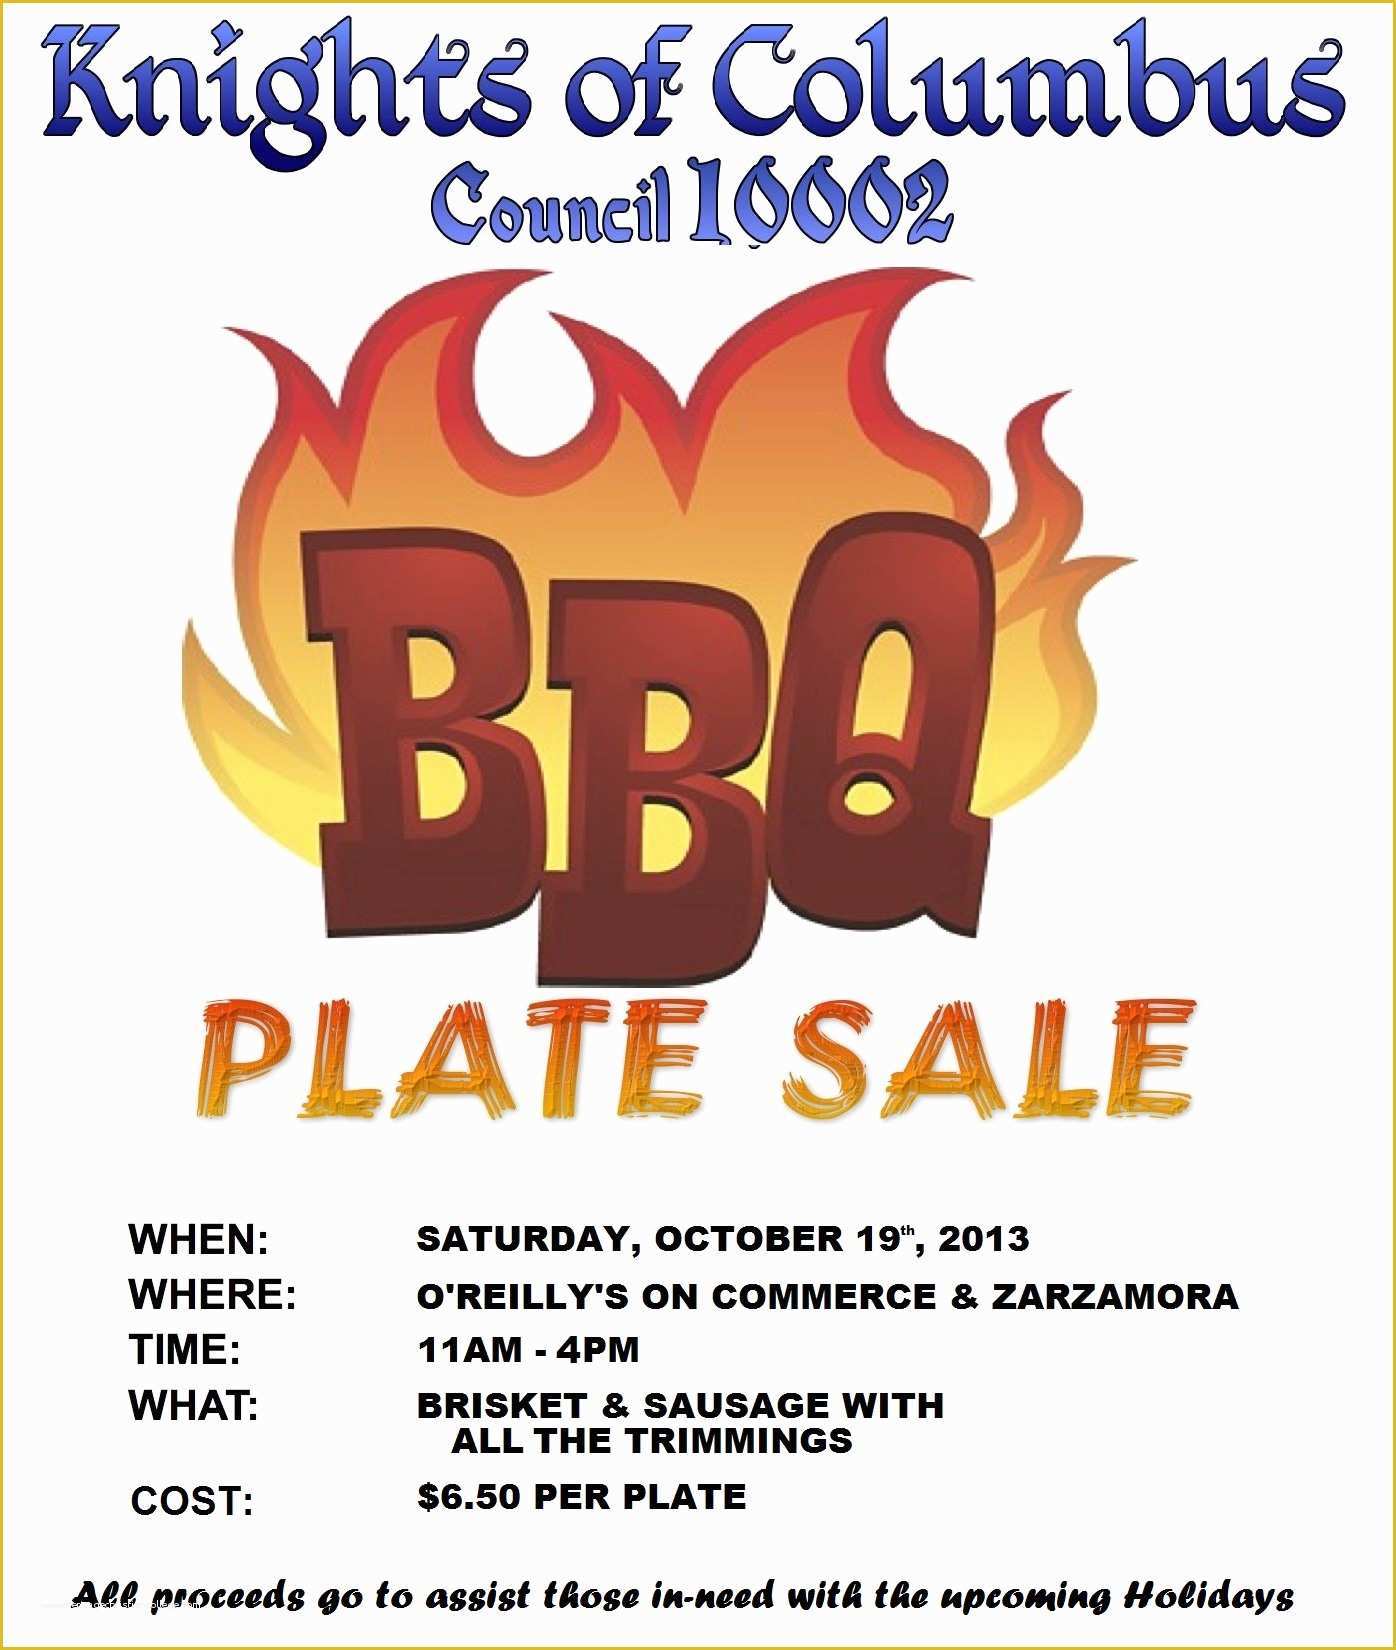 Free Dinner Sale Flyer Template Of 8 Bbq Fundraiser Flyer Template Bbq Plate